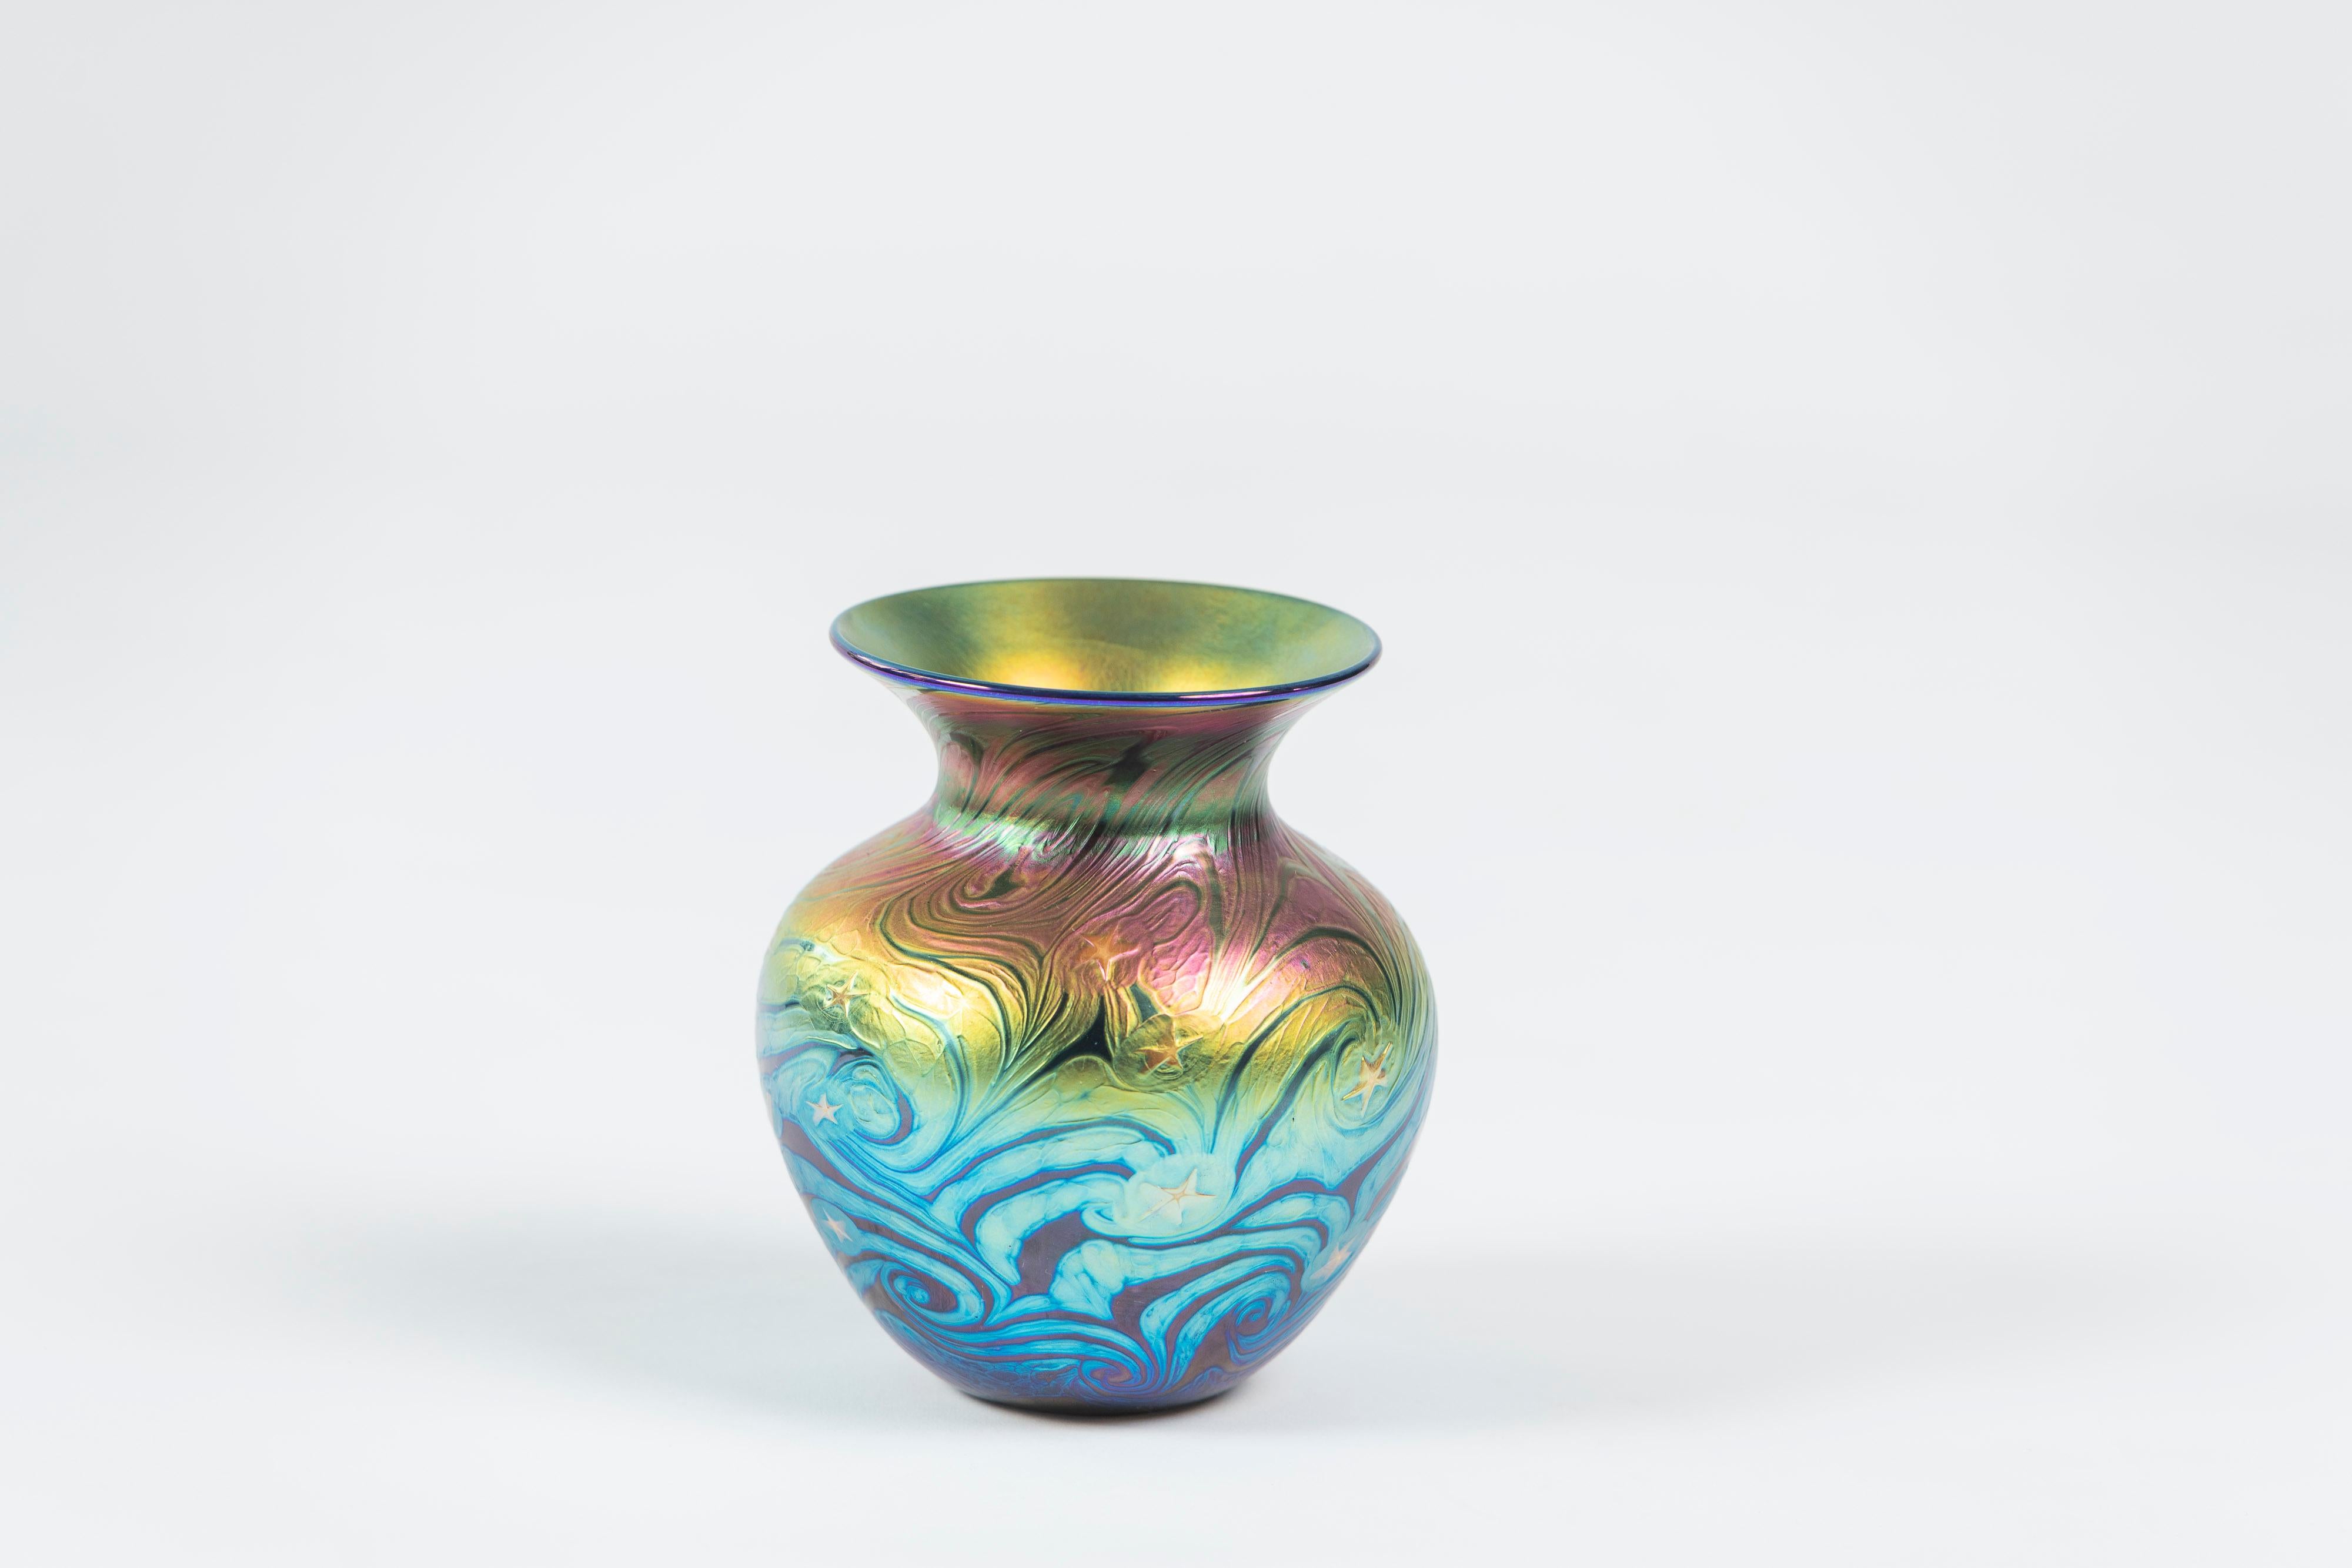 Multi-iridescent swirl art glass vase, Lundberg Studios of California, signed 2001. Beautiful finishes and in collectible condition.